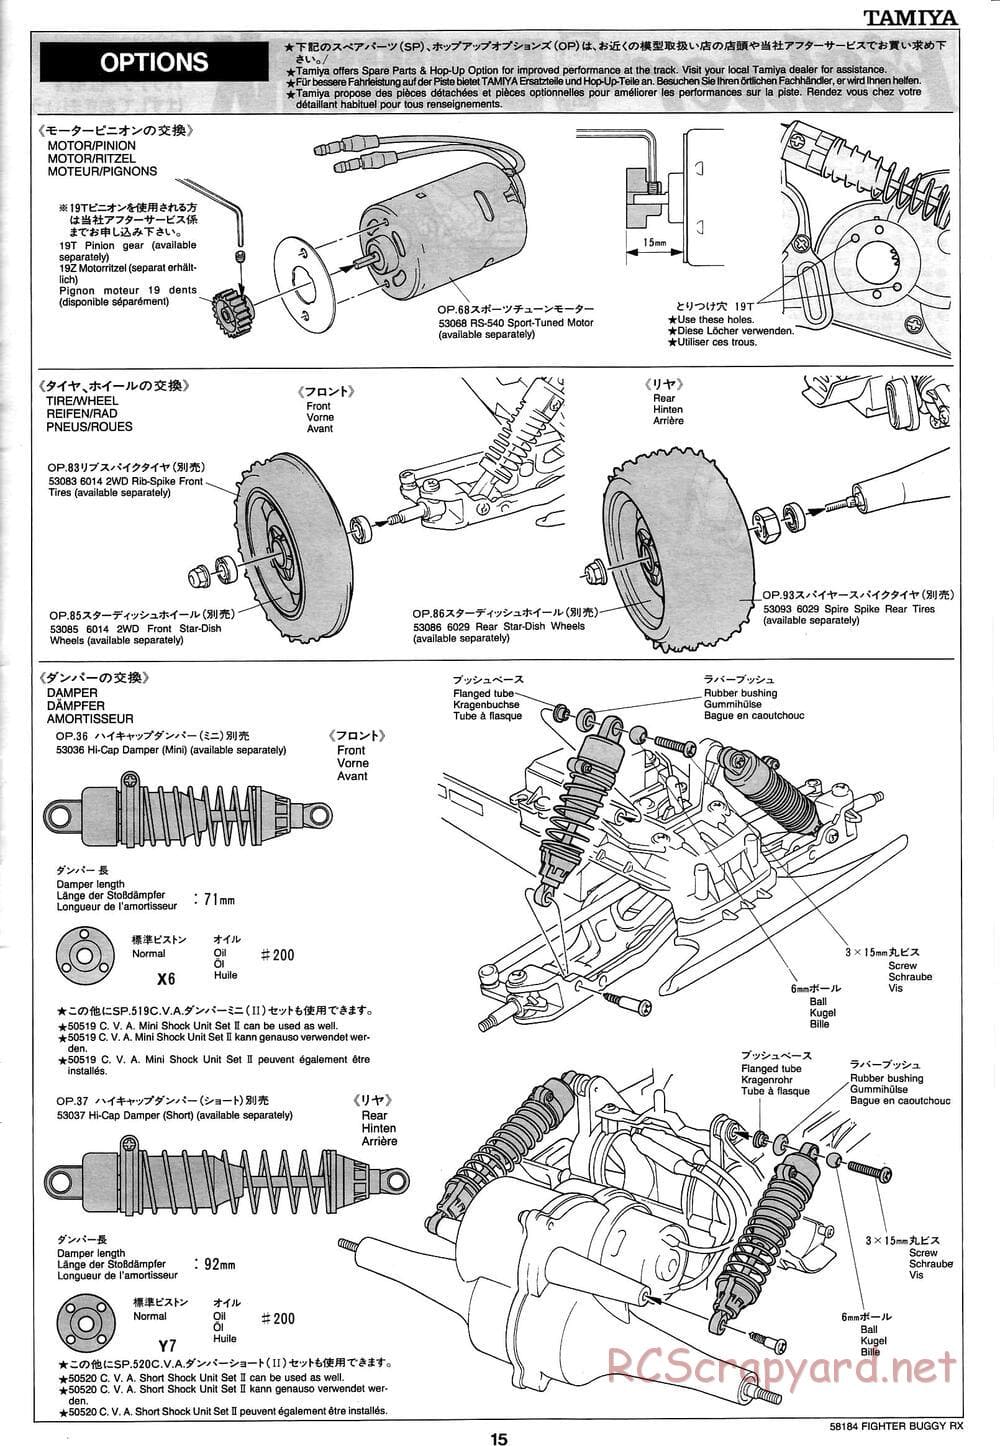 Tamiya - Fighter Buggy RX Chassis - Manual - Page 15